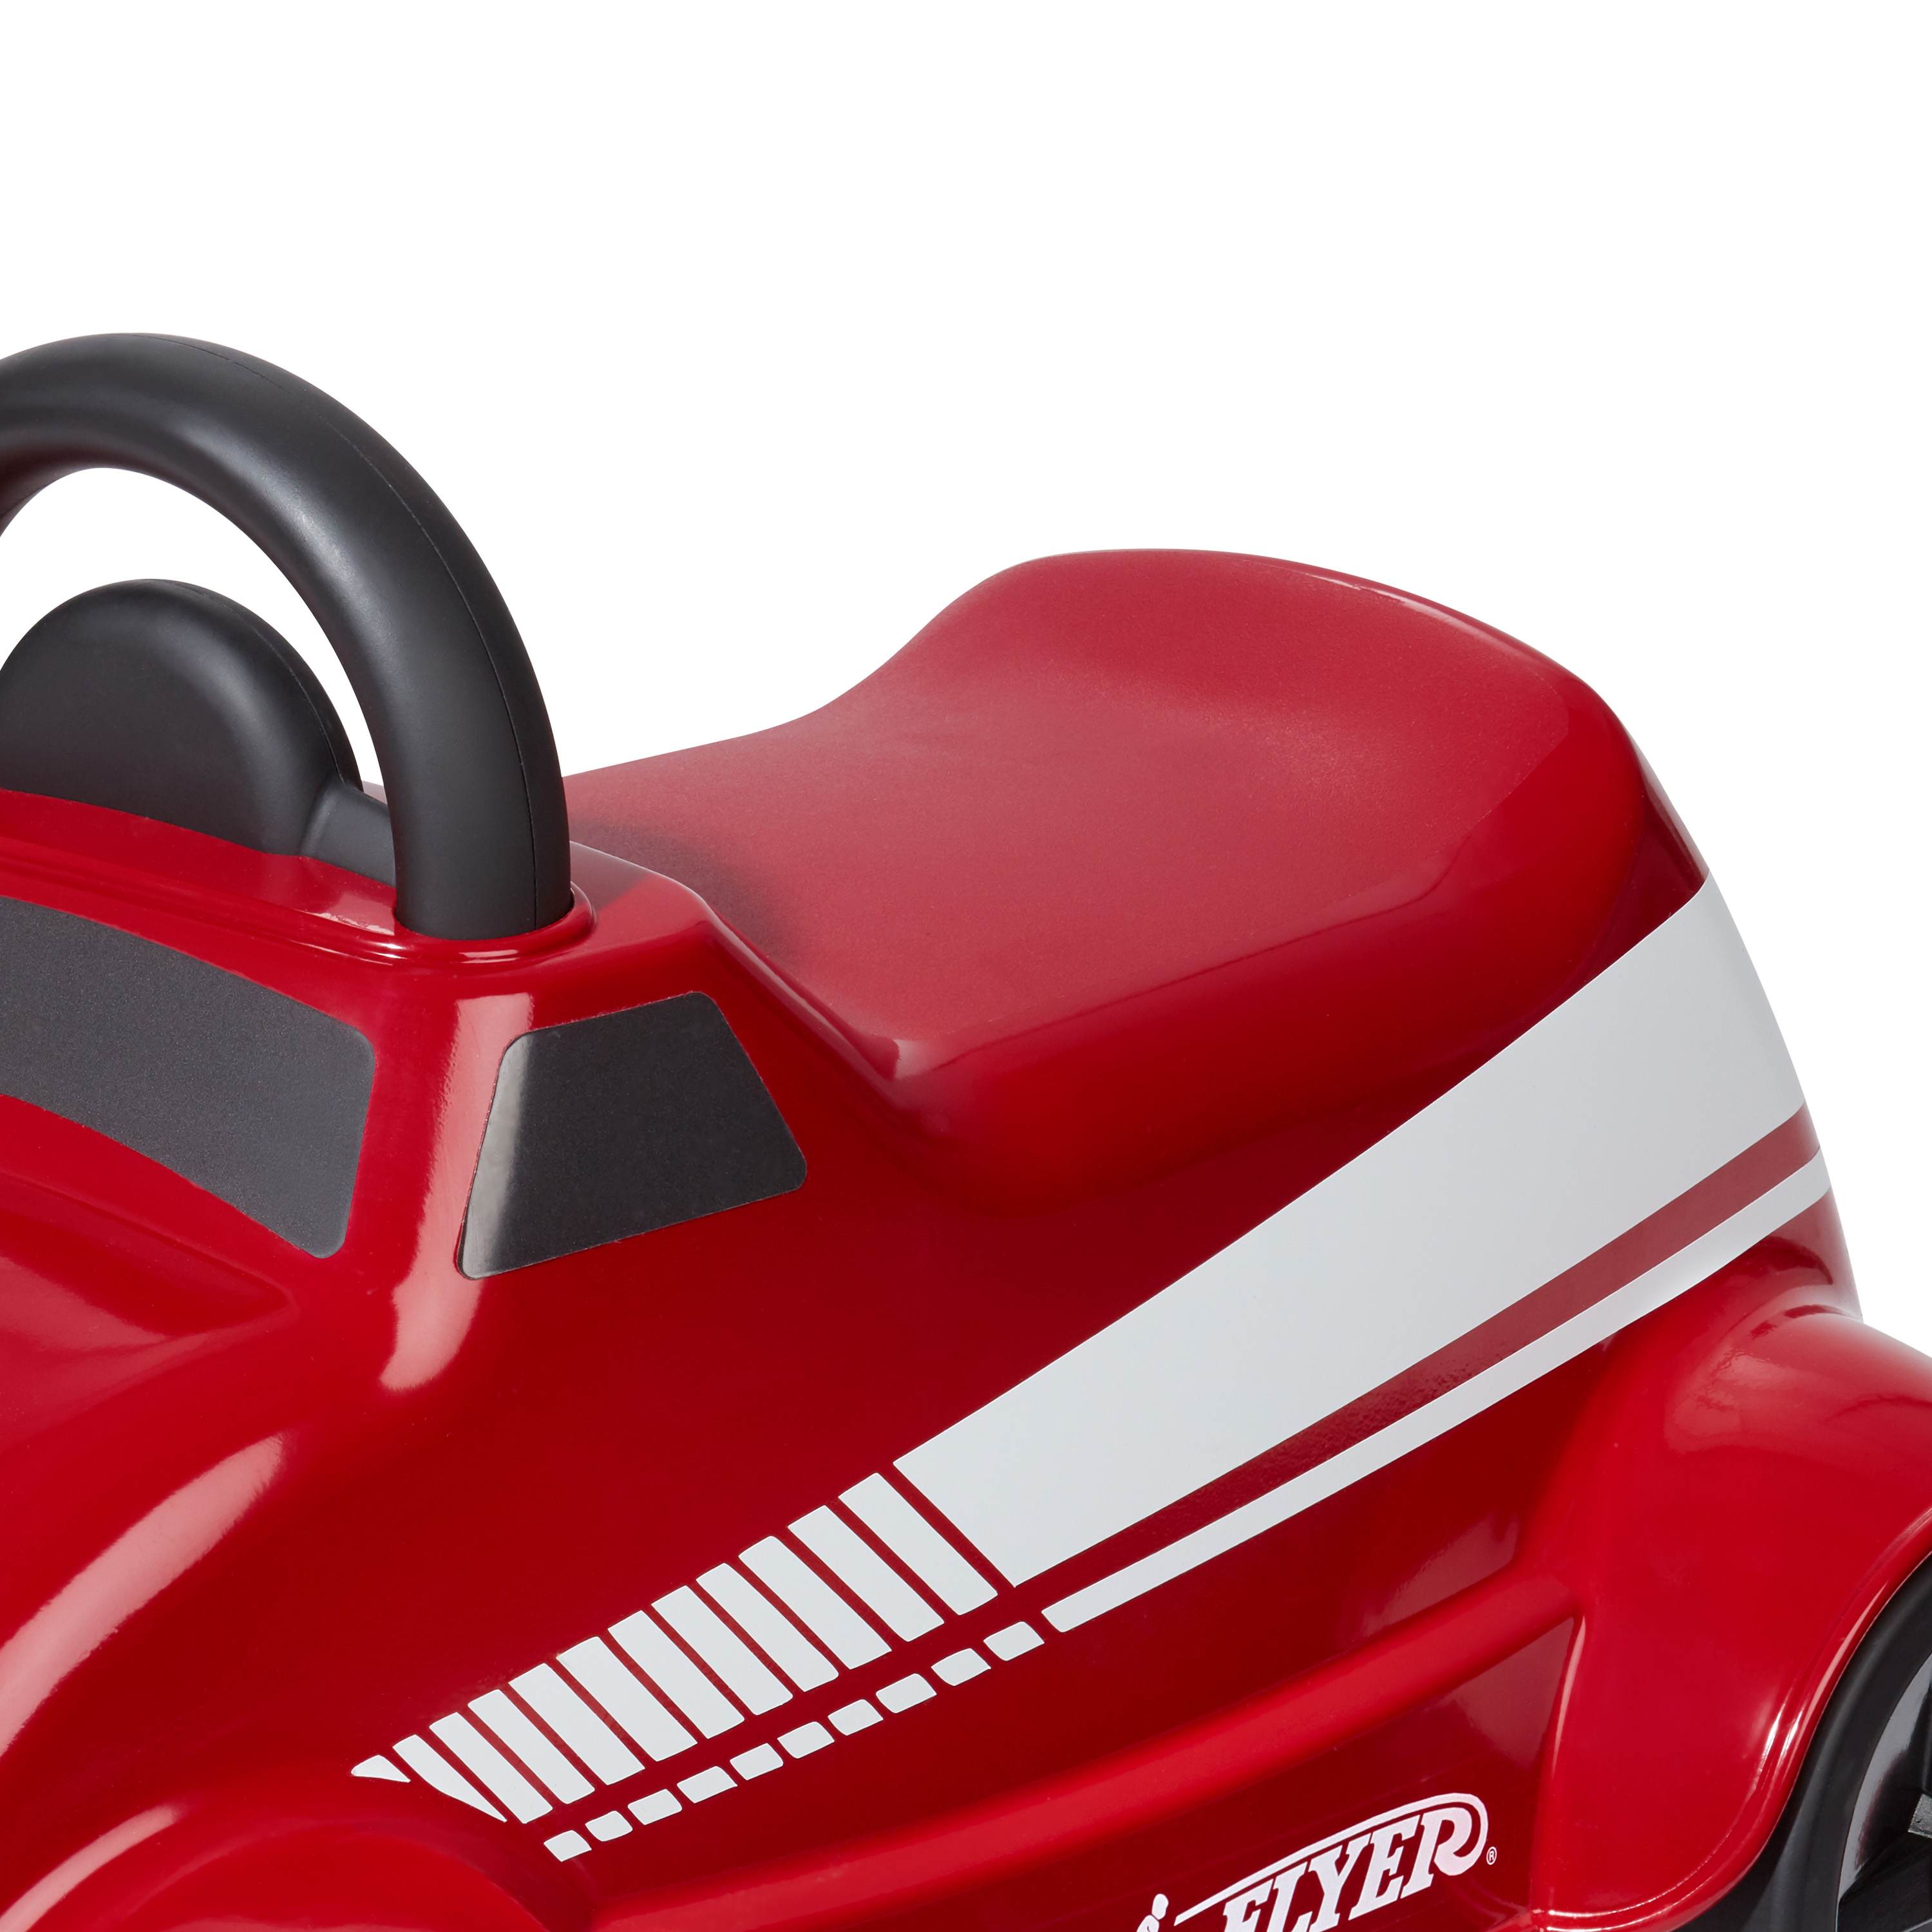 Radio Flyer, My 1st Race Car, Ride-on for Kids, Red, Kids 1-3 Years - image 5 of 7